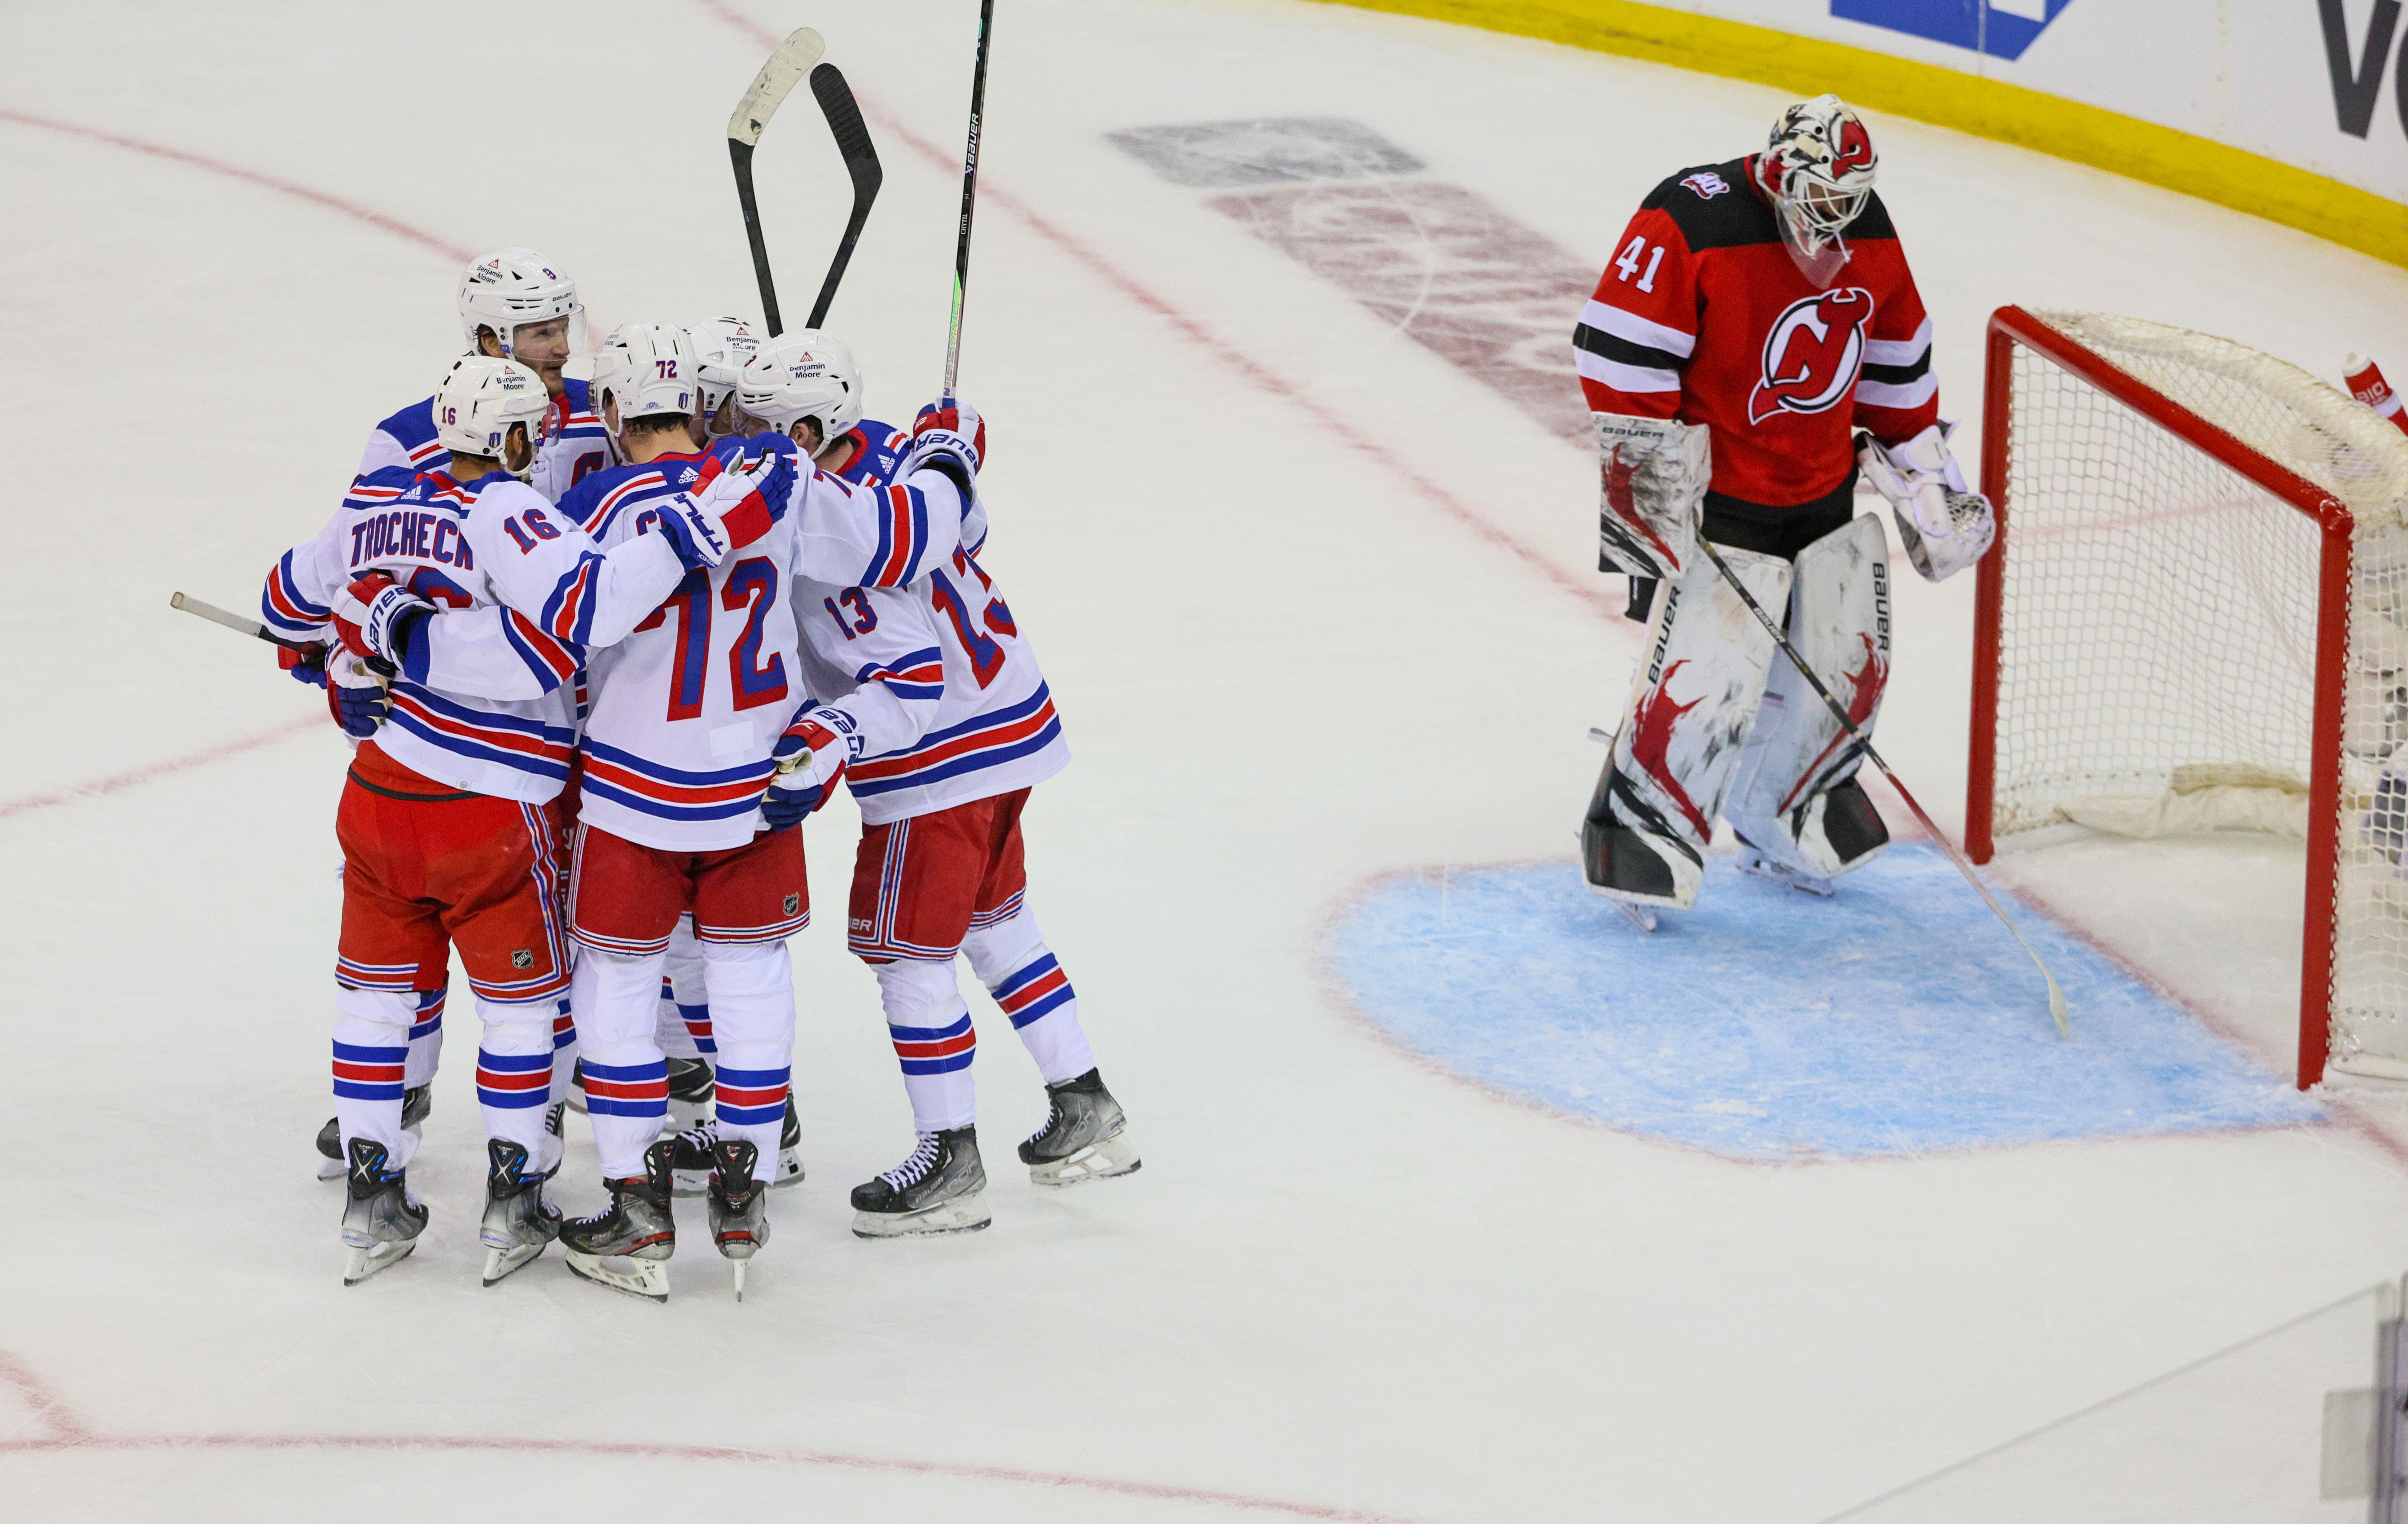 New York Rangers get a statement win in game one over the Devils